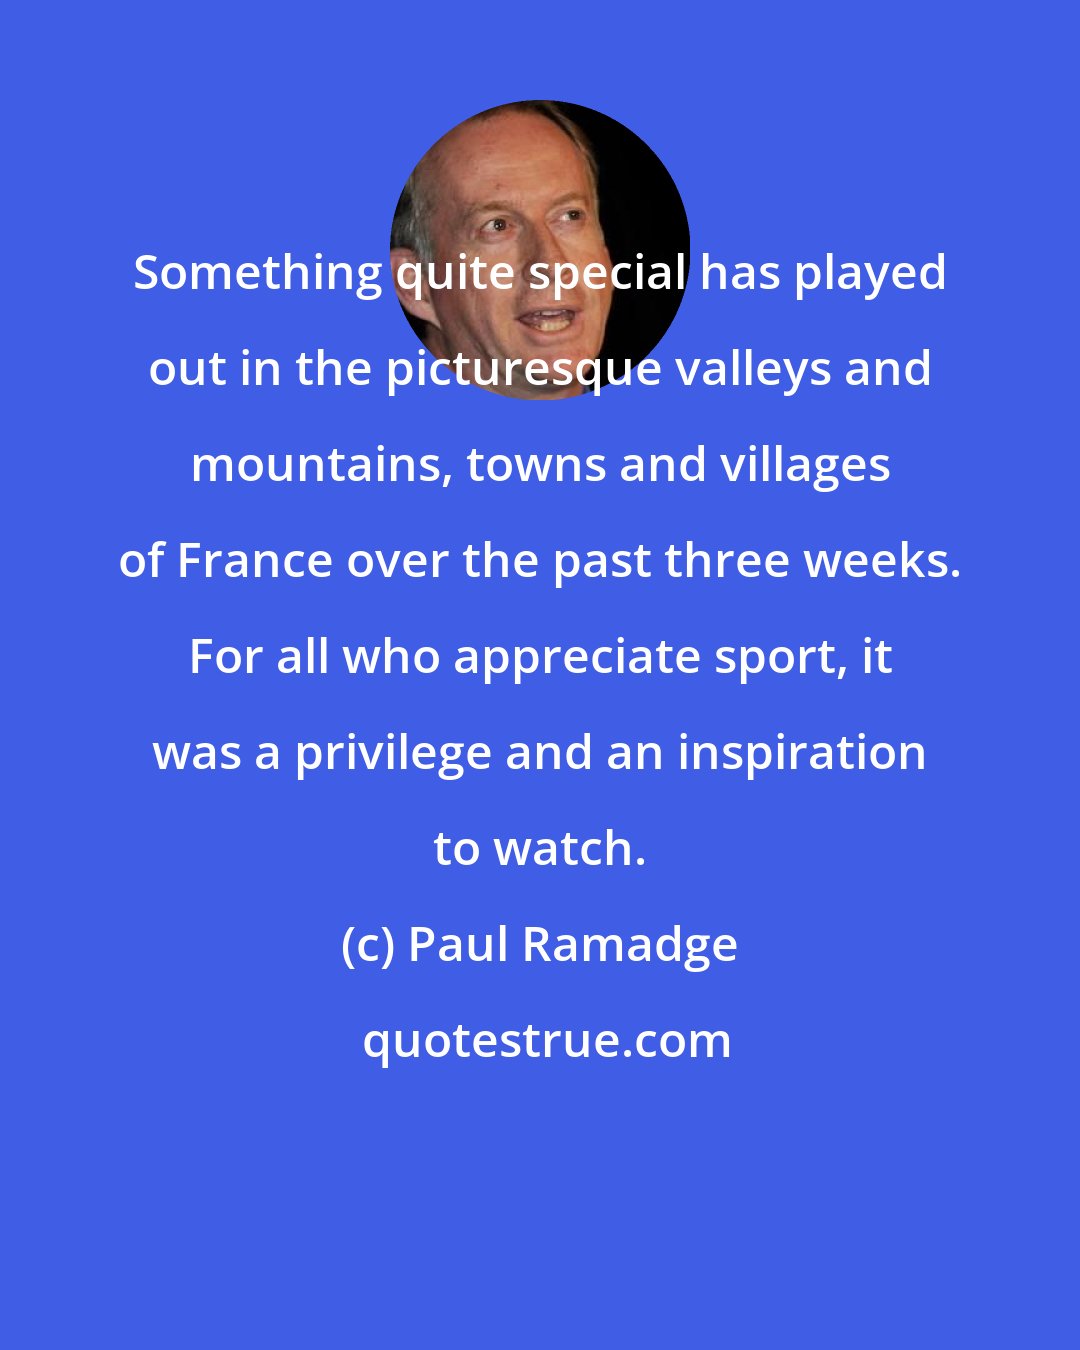 Paul Ramadge: Something quite special has played out in the picturesque valleys and mountains, towns and villages of France over the past three weeks. For all who appreciate sport, it was a privilege and an inspiration to watch.